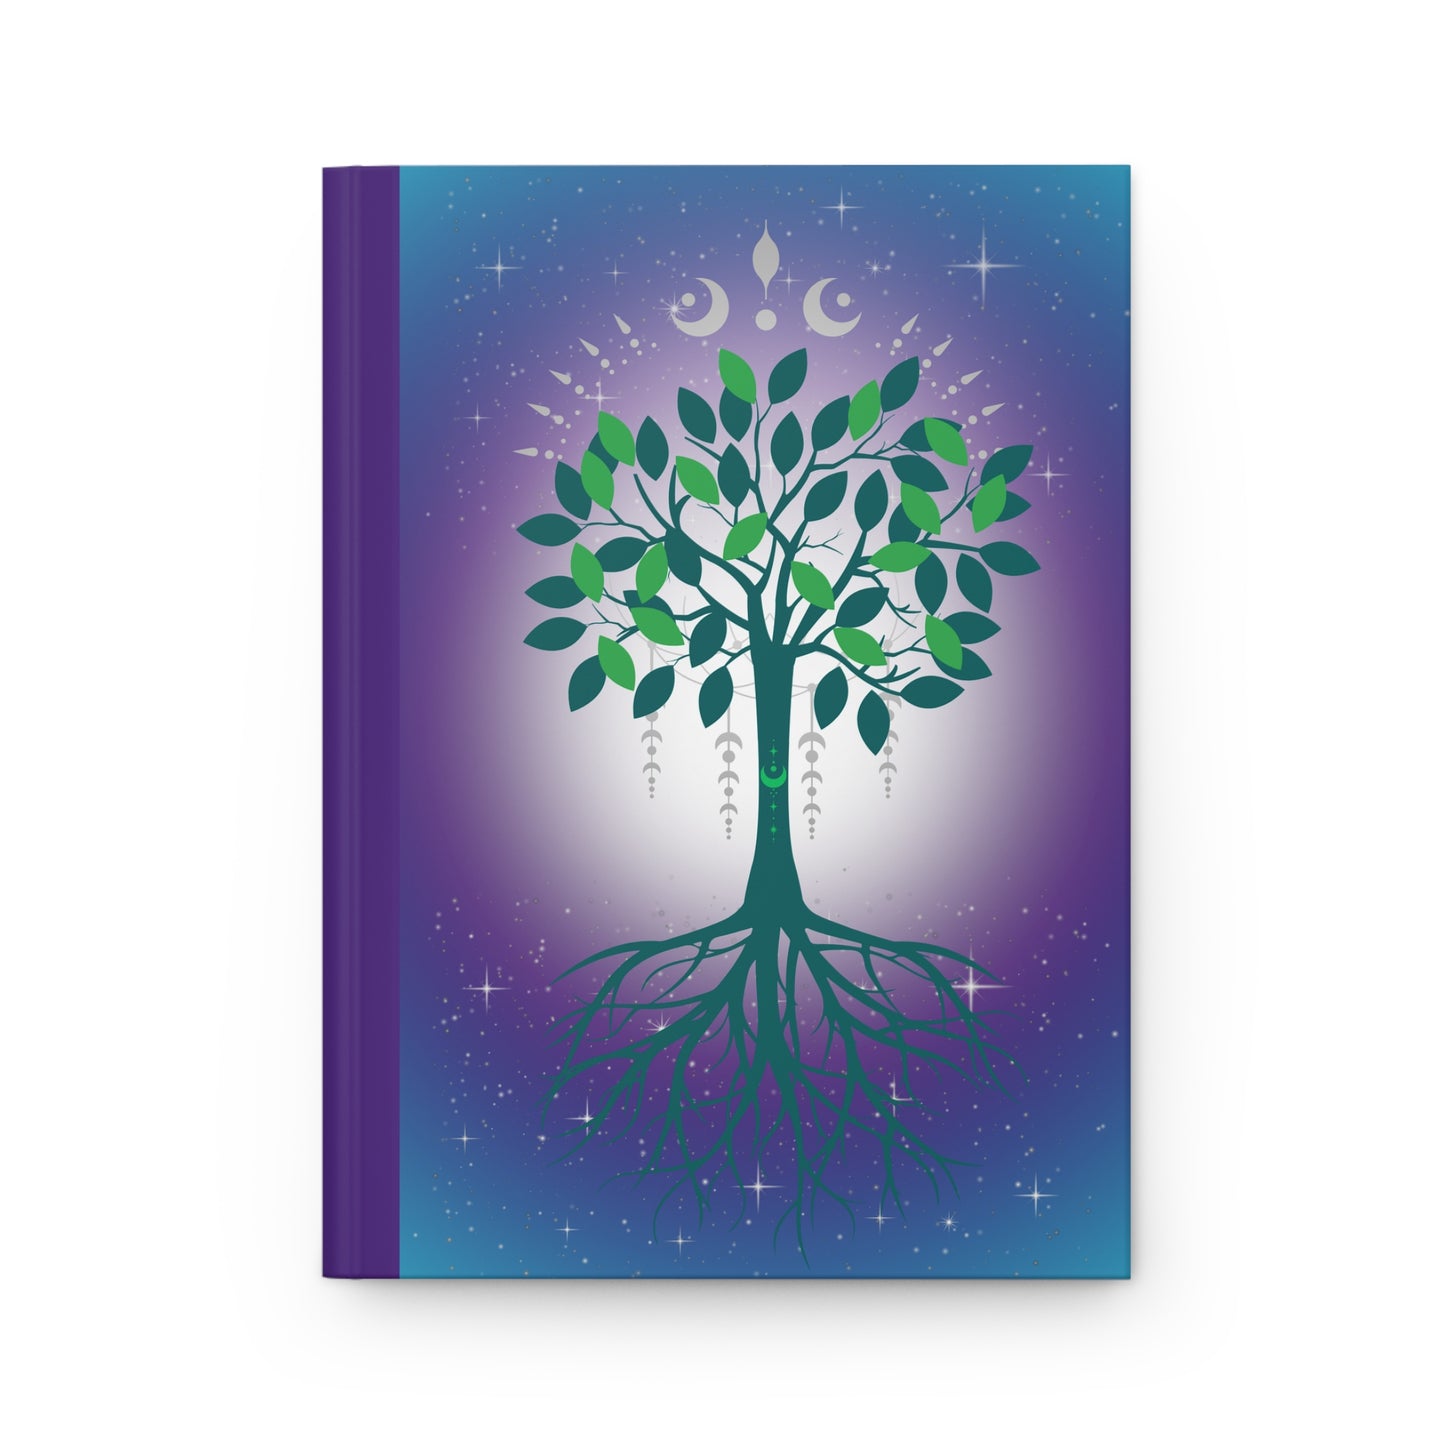 My Life Journal | Crown Tree of Life | Hardcover Edition